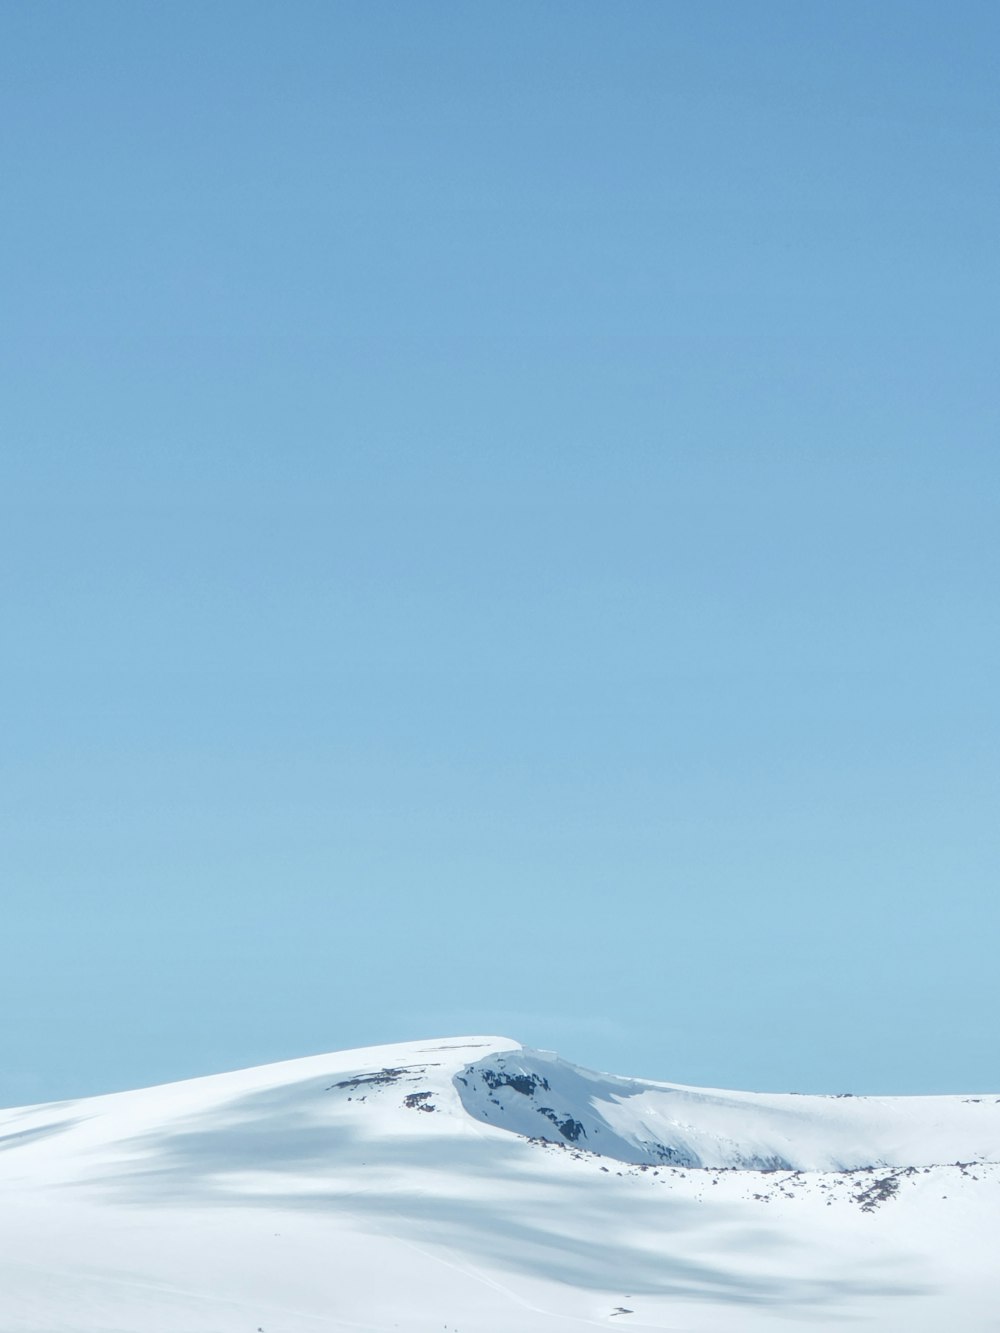 a snowy landscape with a blue sky